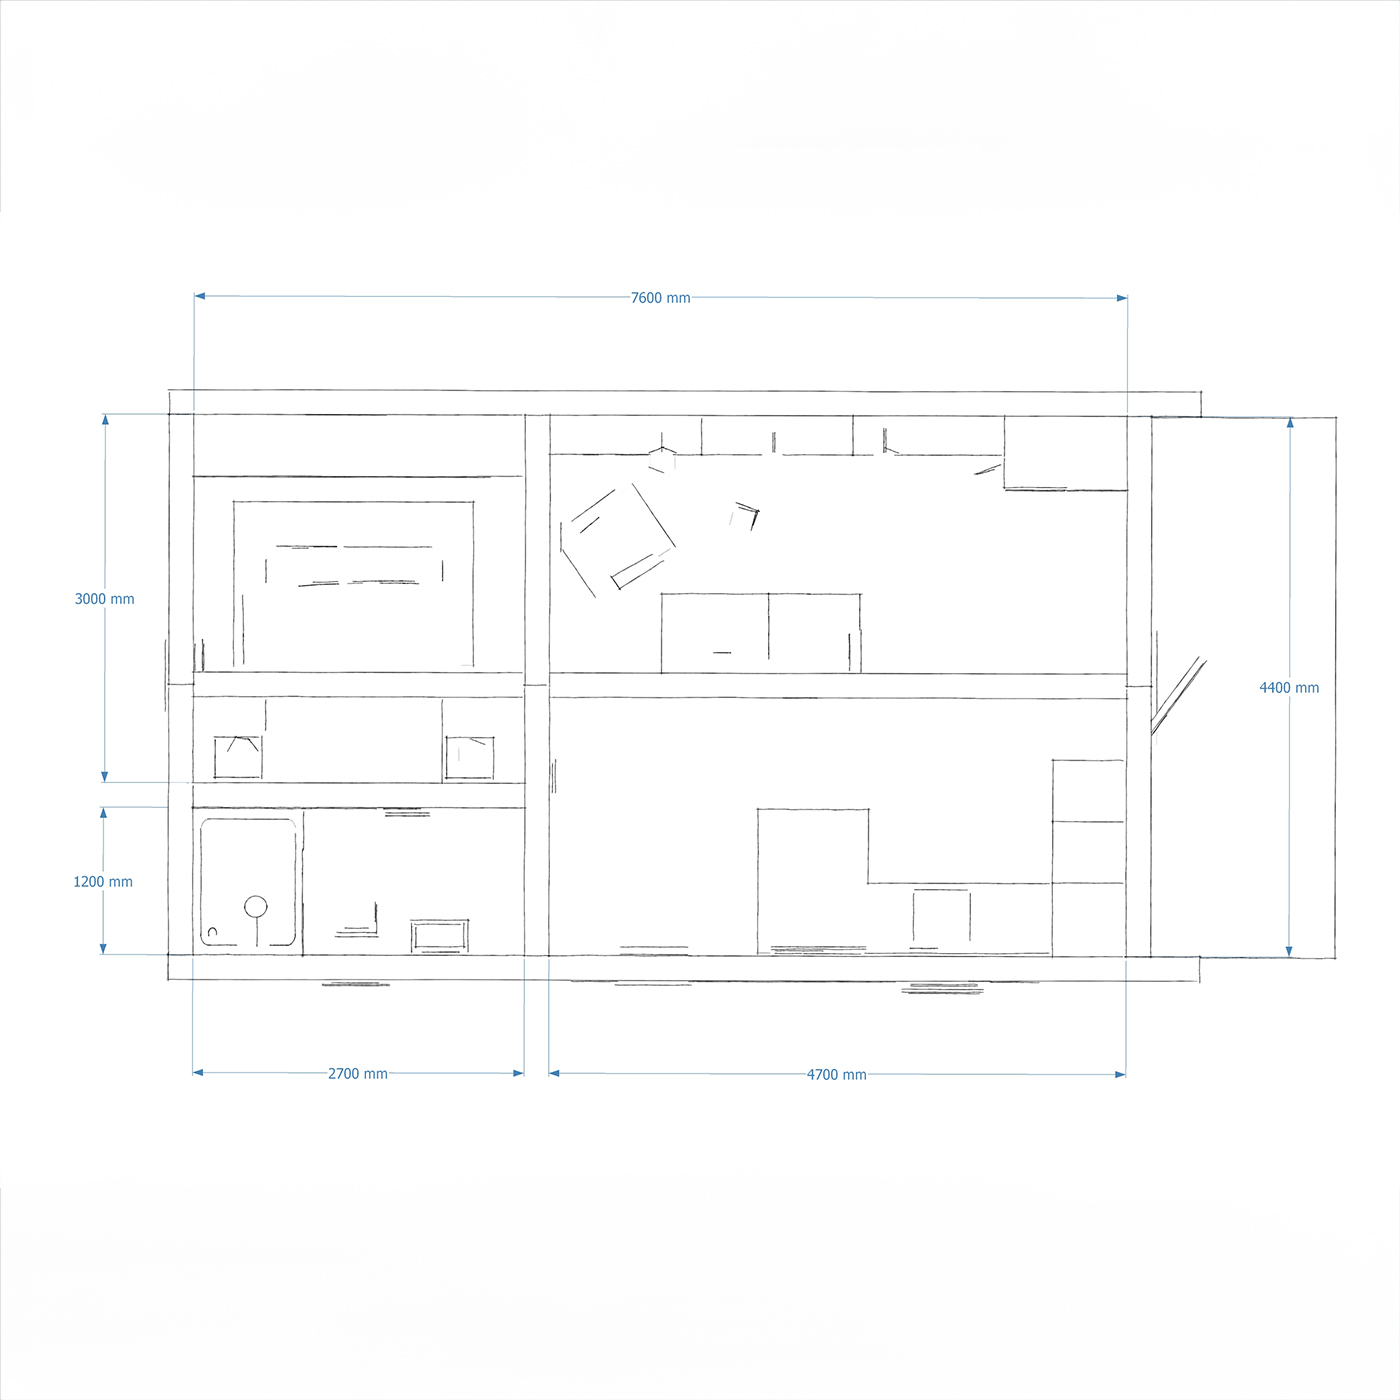 Interior dimensions of 4.8m by 8.4m mobile home